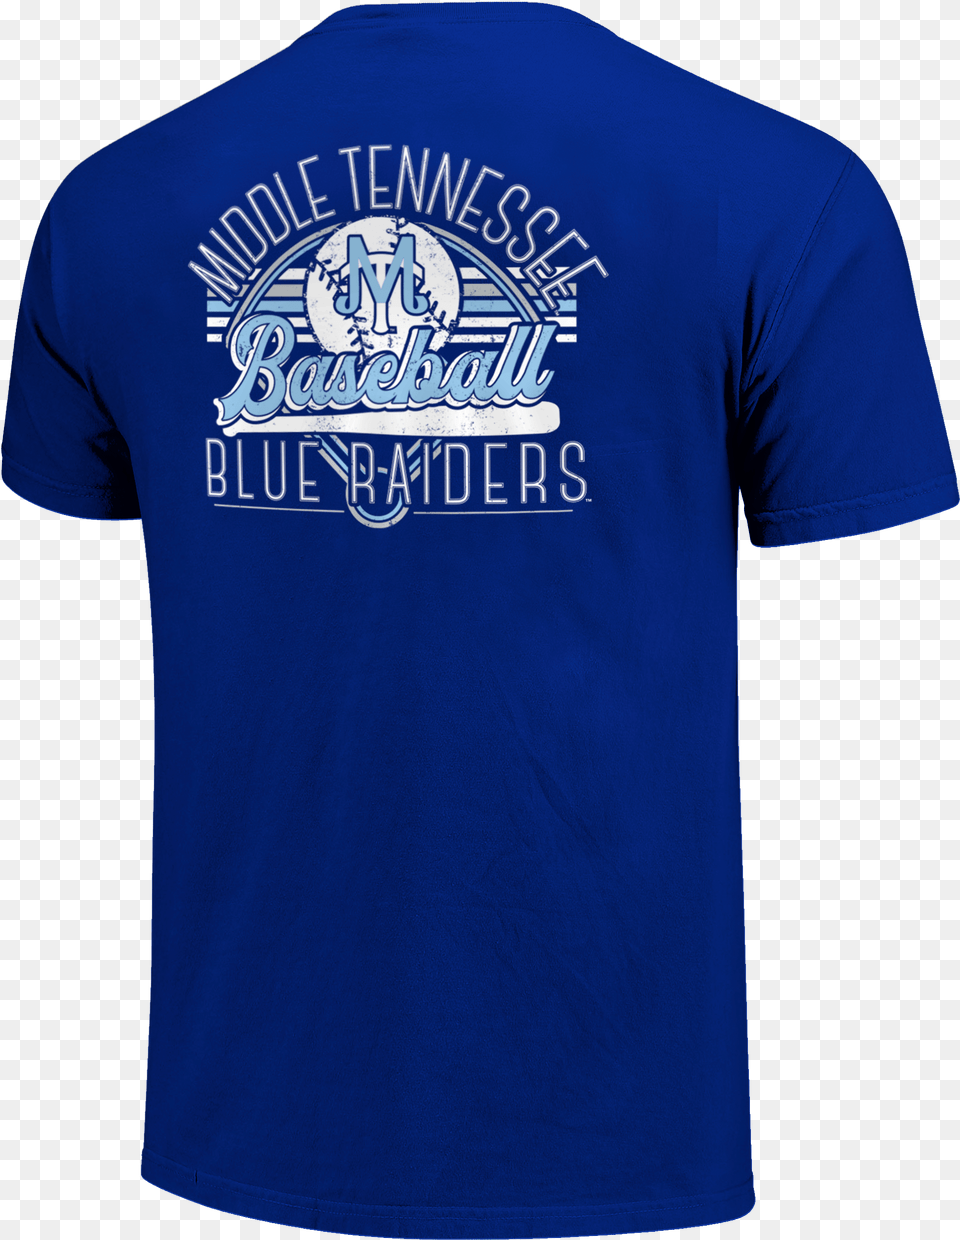 Middle Tennessee Baseball Field Stripes Tshirt Active Shirt, Clothing, T-shirt Free Png Download